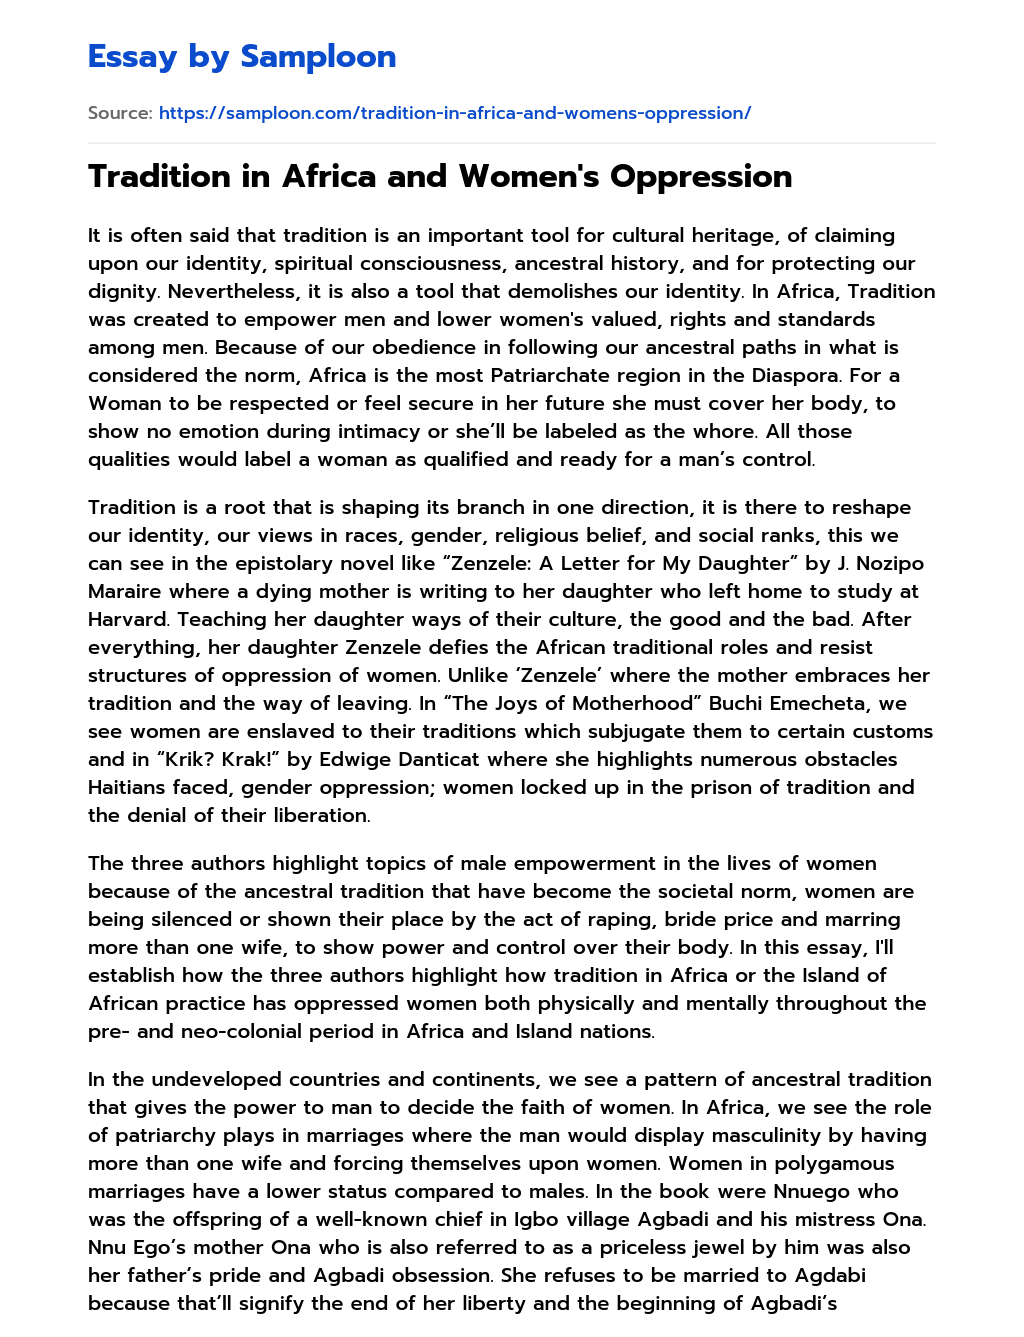 Tradition in Africa and Women’s Oppression essay